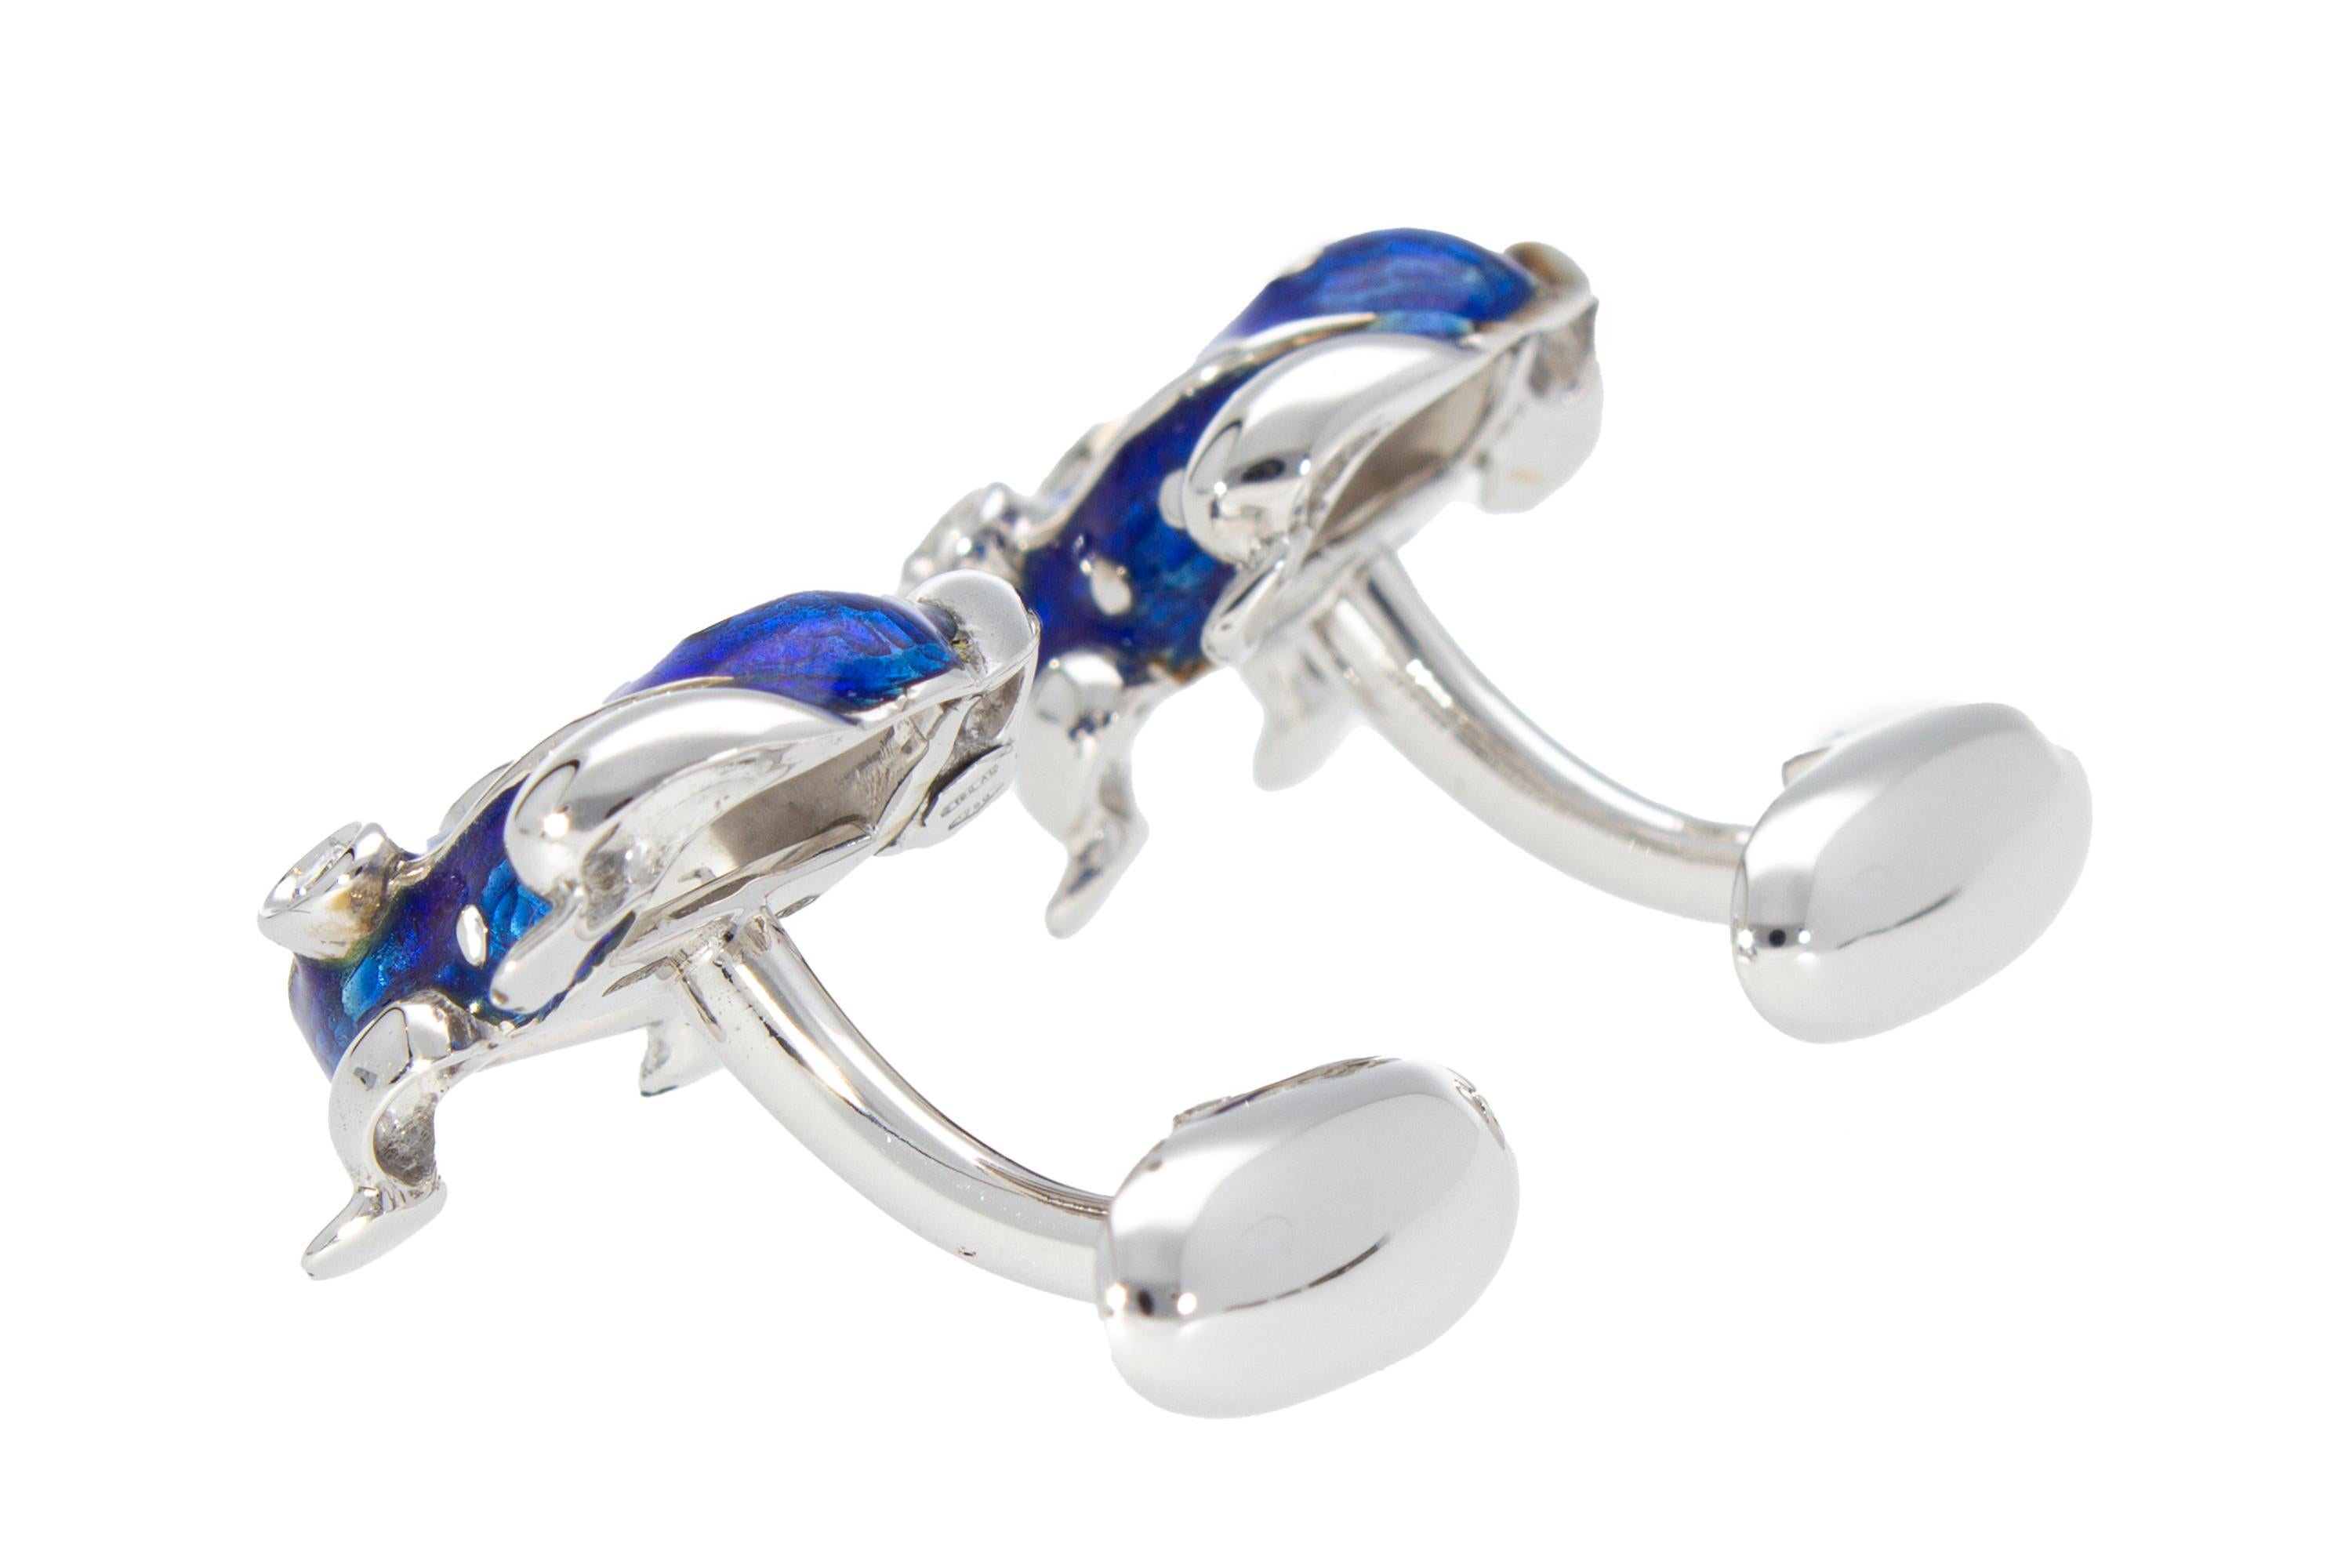 18 Kt White Gold with Blu Enamel Diamonds Frog Cufflinks Handcraft Made in Italy For Sale 3